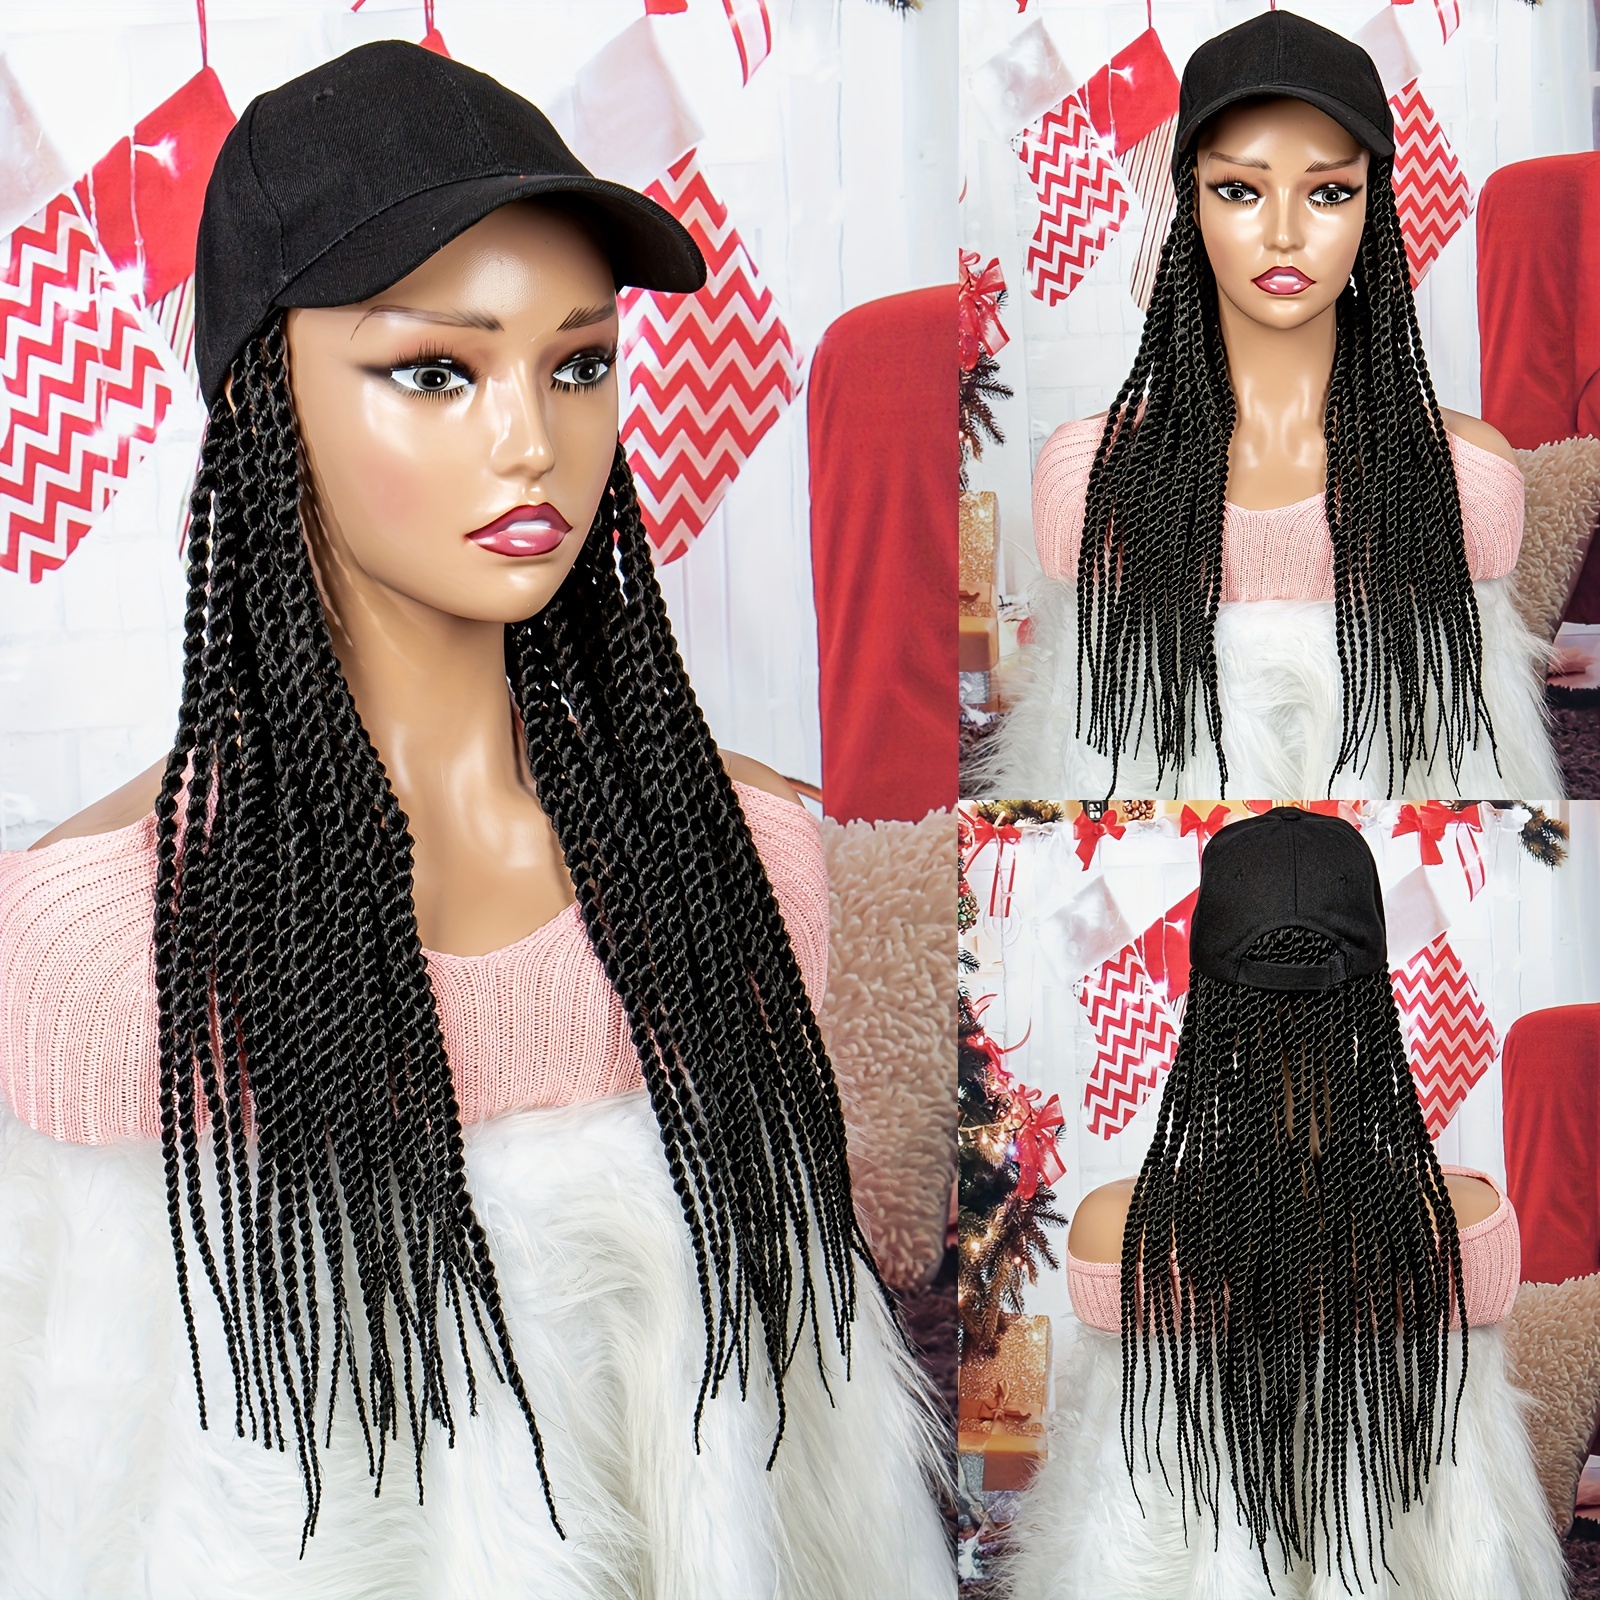 

Long Box Braid Hair Wig With Baseball Cap - Synthetic Hair Attached - Perfect For Women's Baseball Cap Look